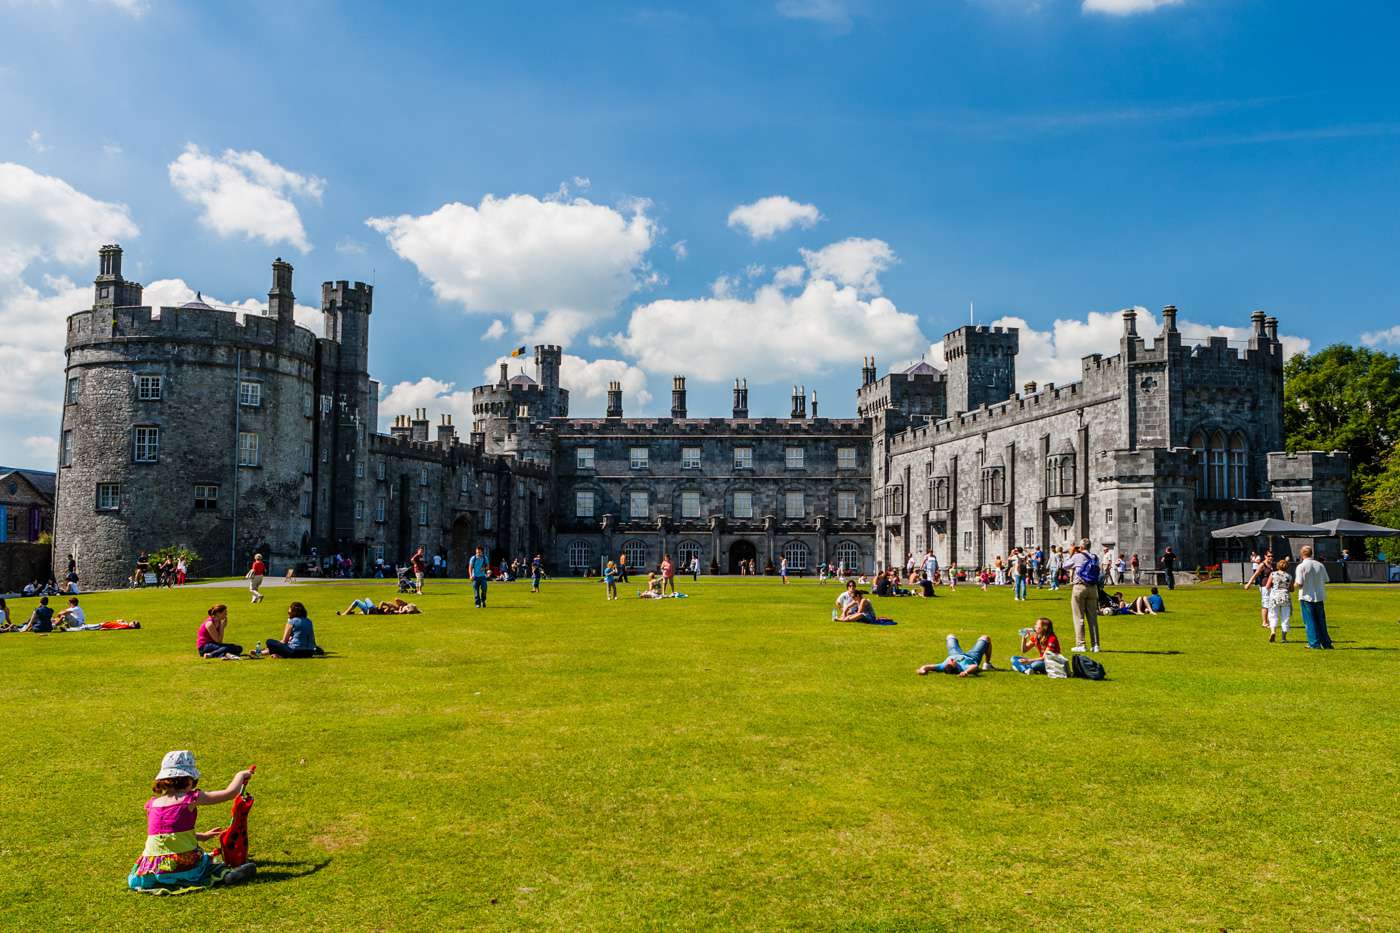 22 Things To Do In Kilkenny in 2020 - The Irish Road Trip